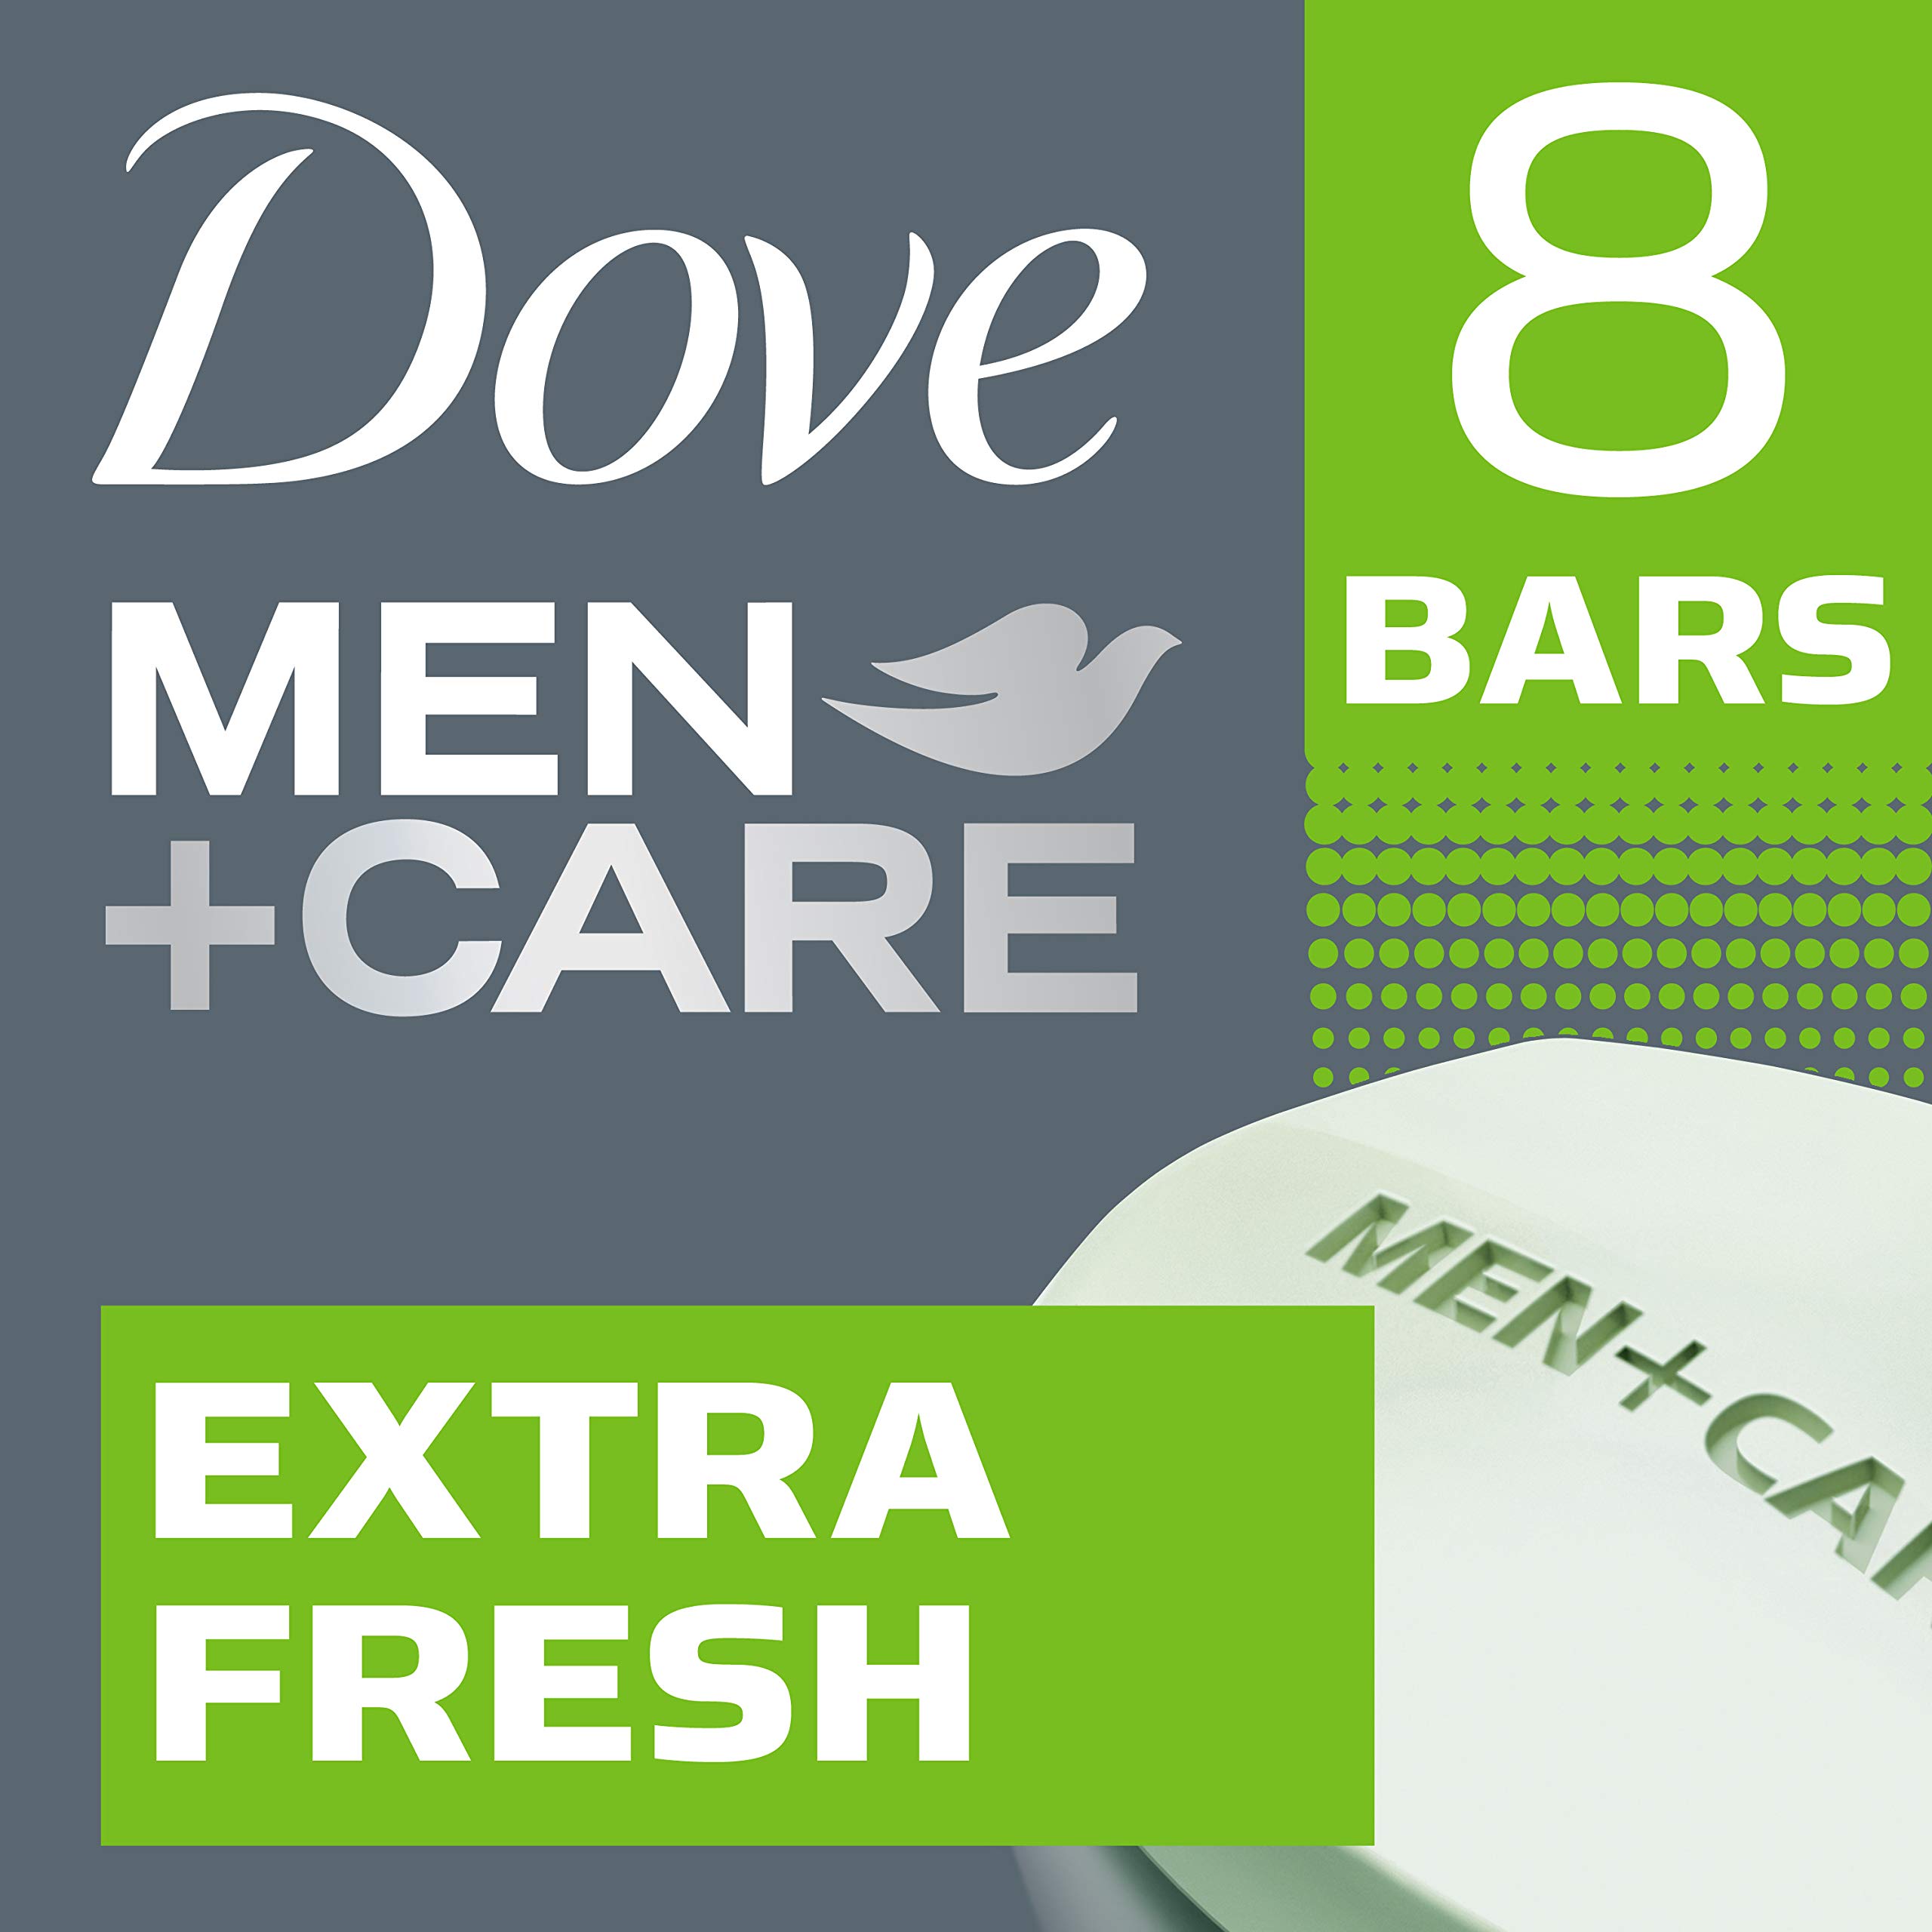 Dove Men+Care 3 in 1 Bar Cleanser for Body, Face, and Shaving Extra Fresh Body and Facial Cleanser More Moisturizing Than Bar Soap to Clean and Hydrate Skin 3.75 Ounce (Pack of 8)